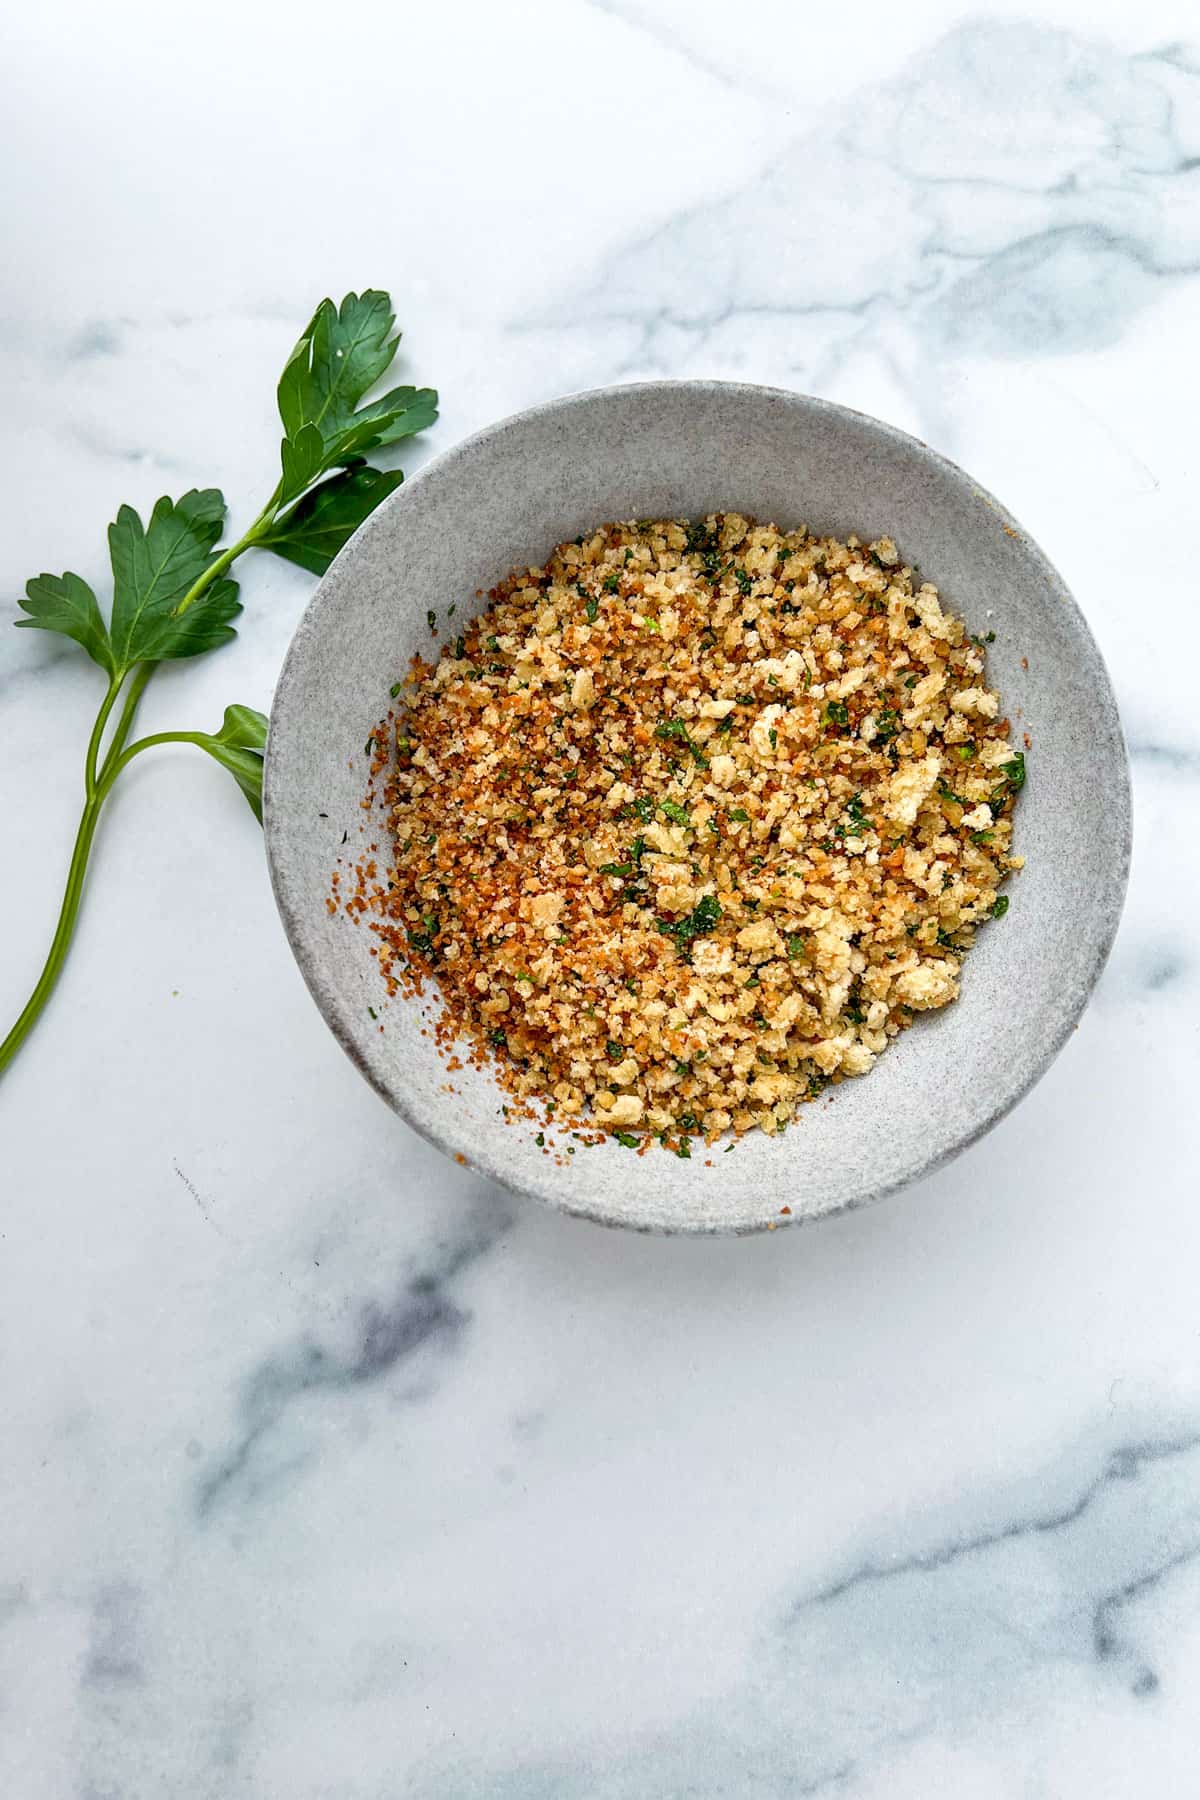 Toasted breadcrumbs mixed with parsley in a small wold on a marble counter.